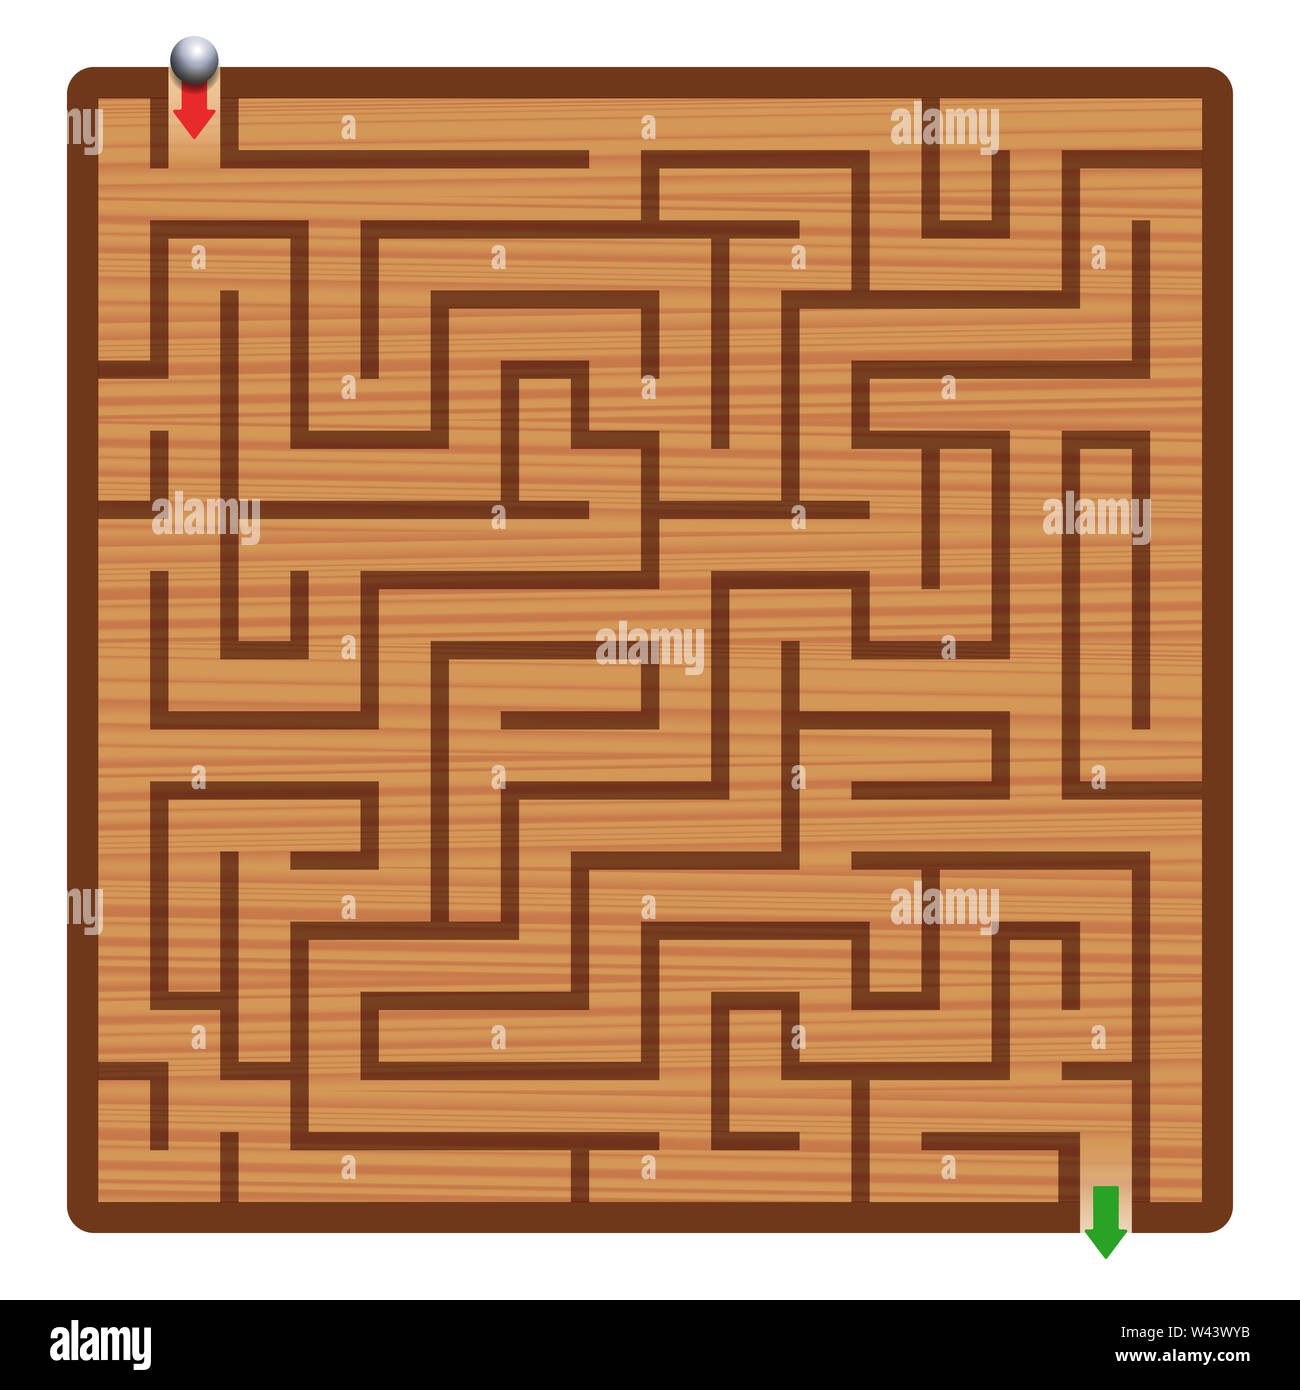 Wooden labyrinth with iron ball. Maze - square format labyrinth - fun game to find the right way. Stock Photo